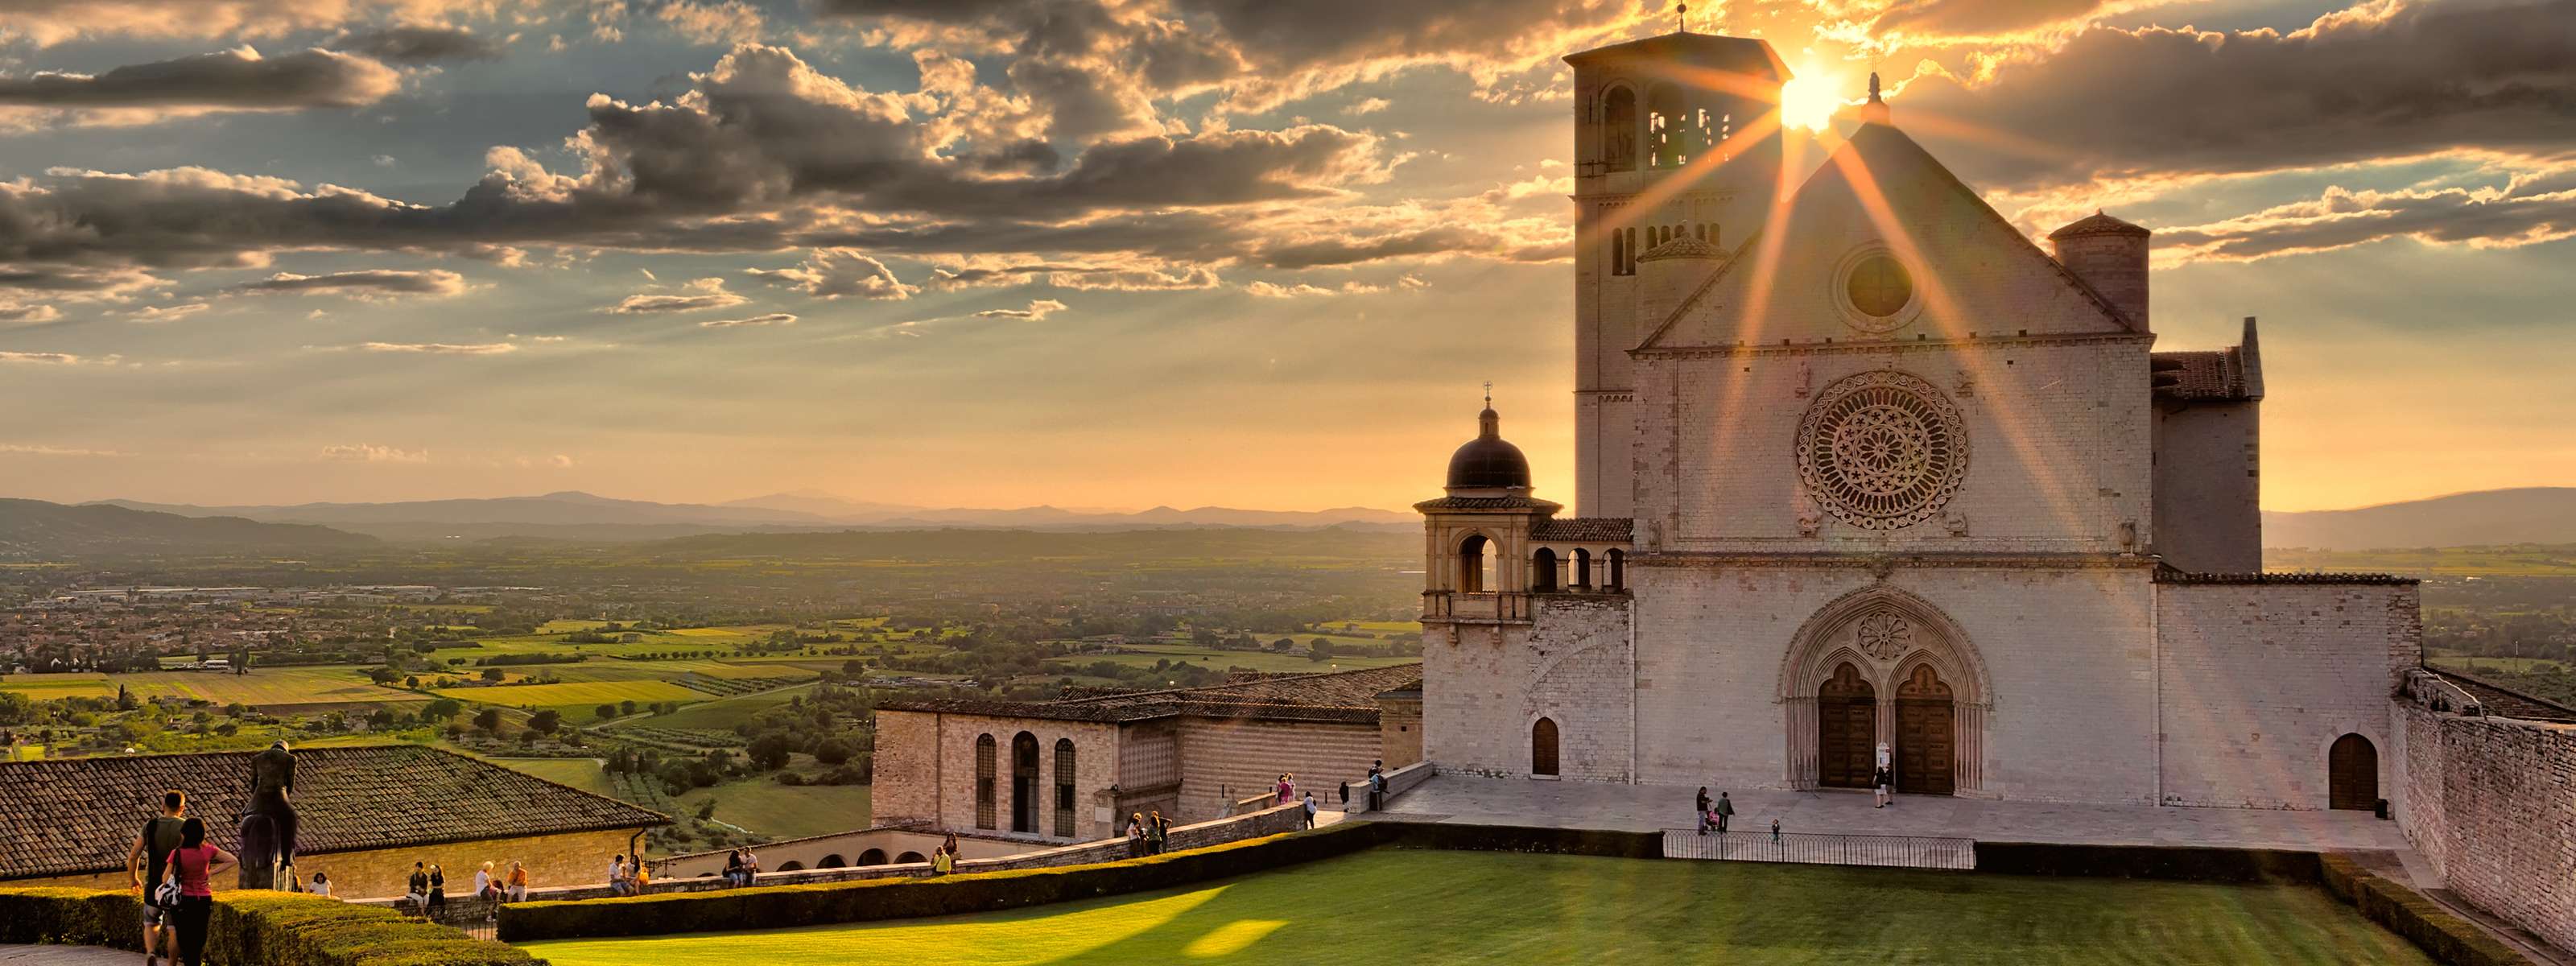 Day trip to Assisi from Rome 3